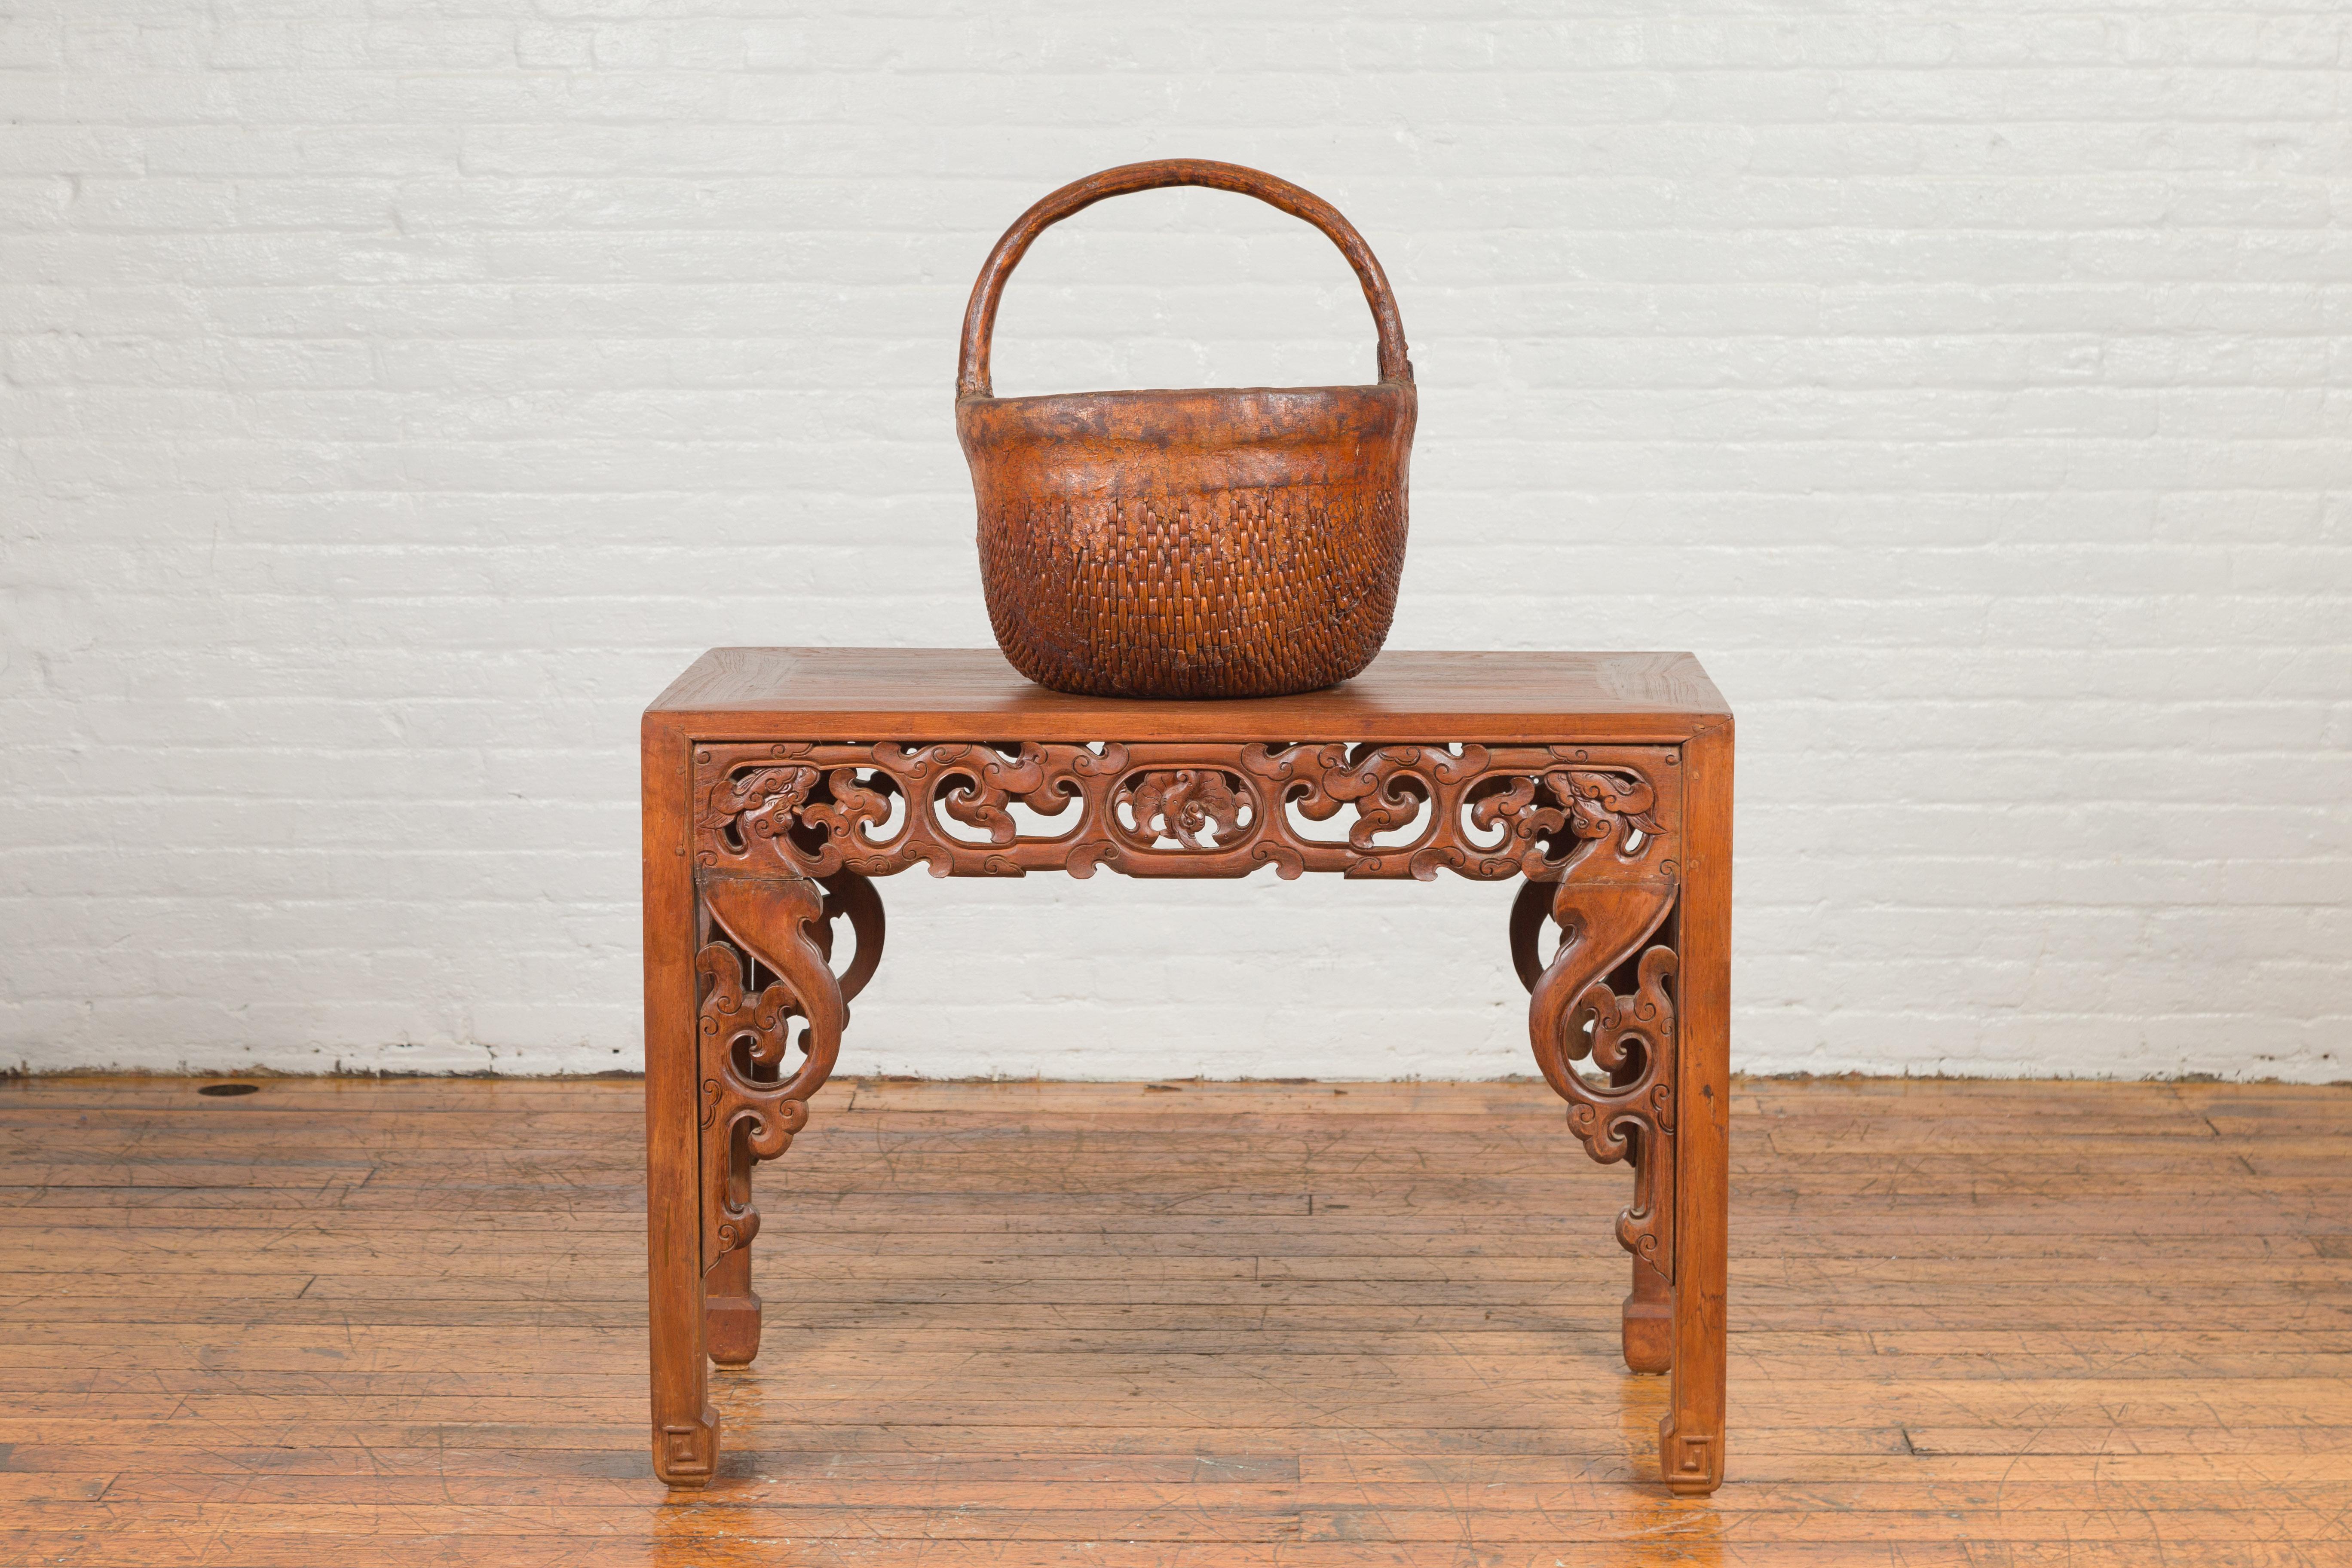 An antique Chinese carrying basket from the 19th century, with intricate woven rattan design. Created in China during the Qing Dynasty, this Chinese carrying basket charms us with its rustic appearance. A large handle is resting upon a rattan body